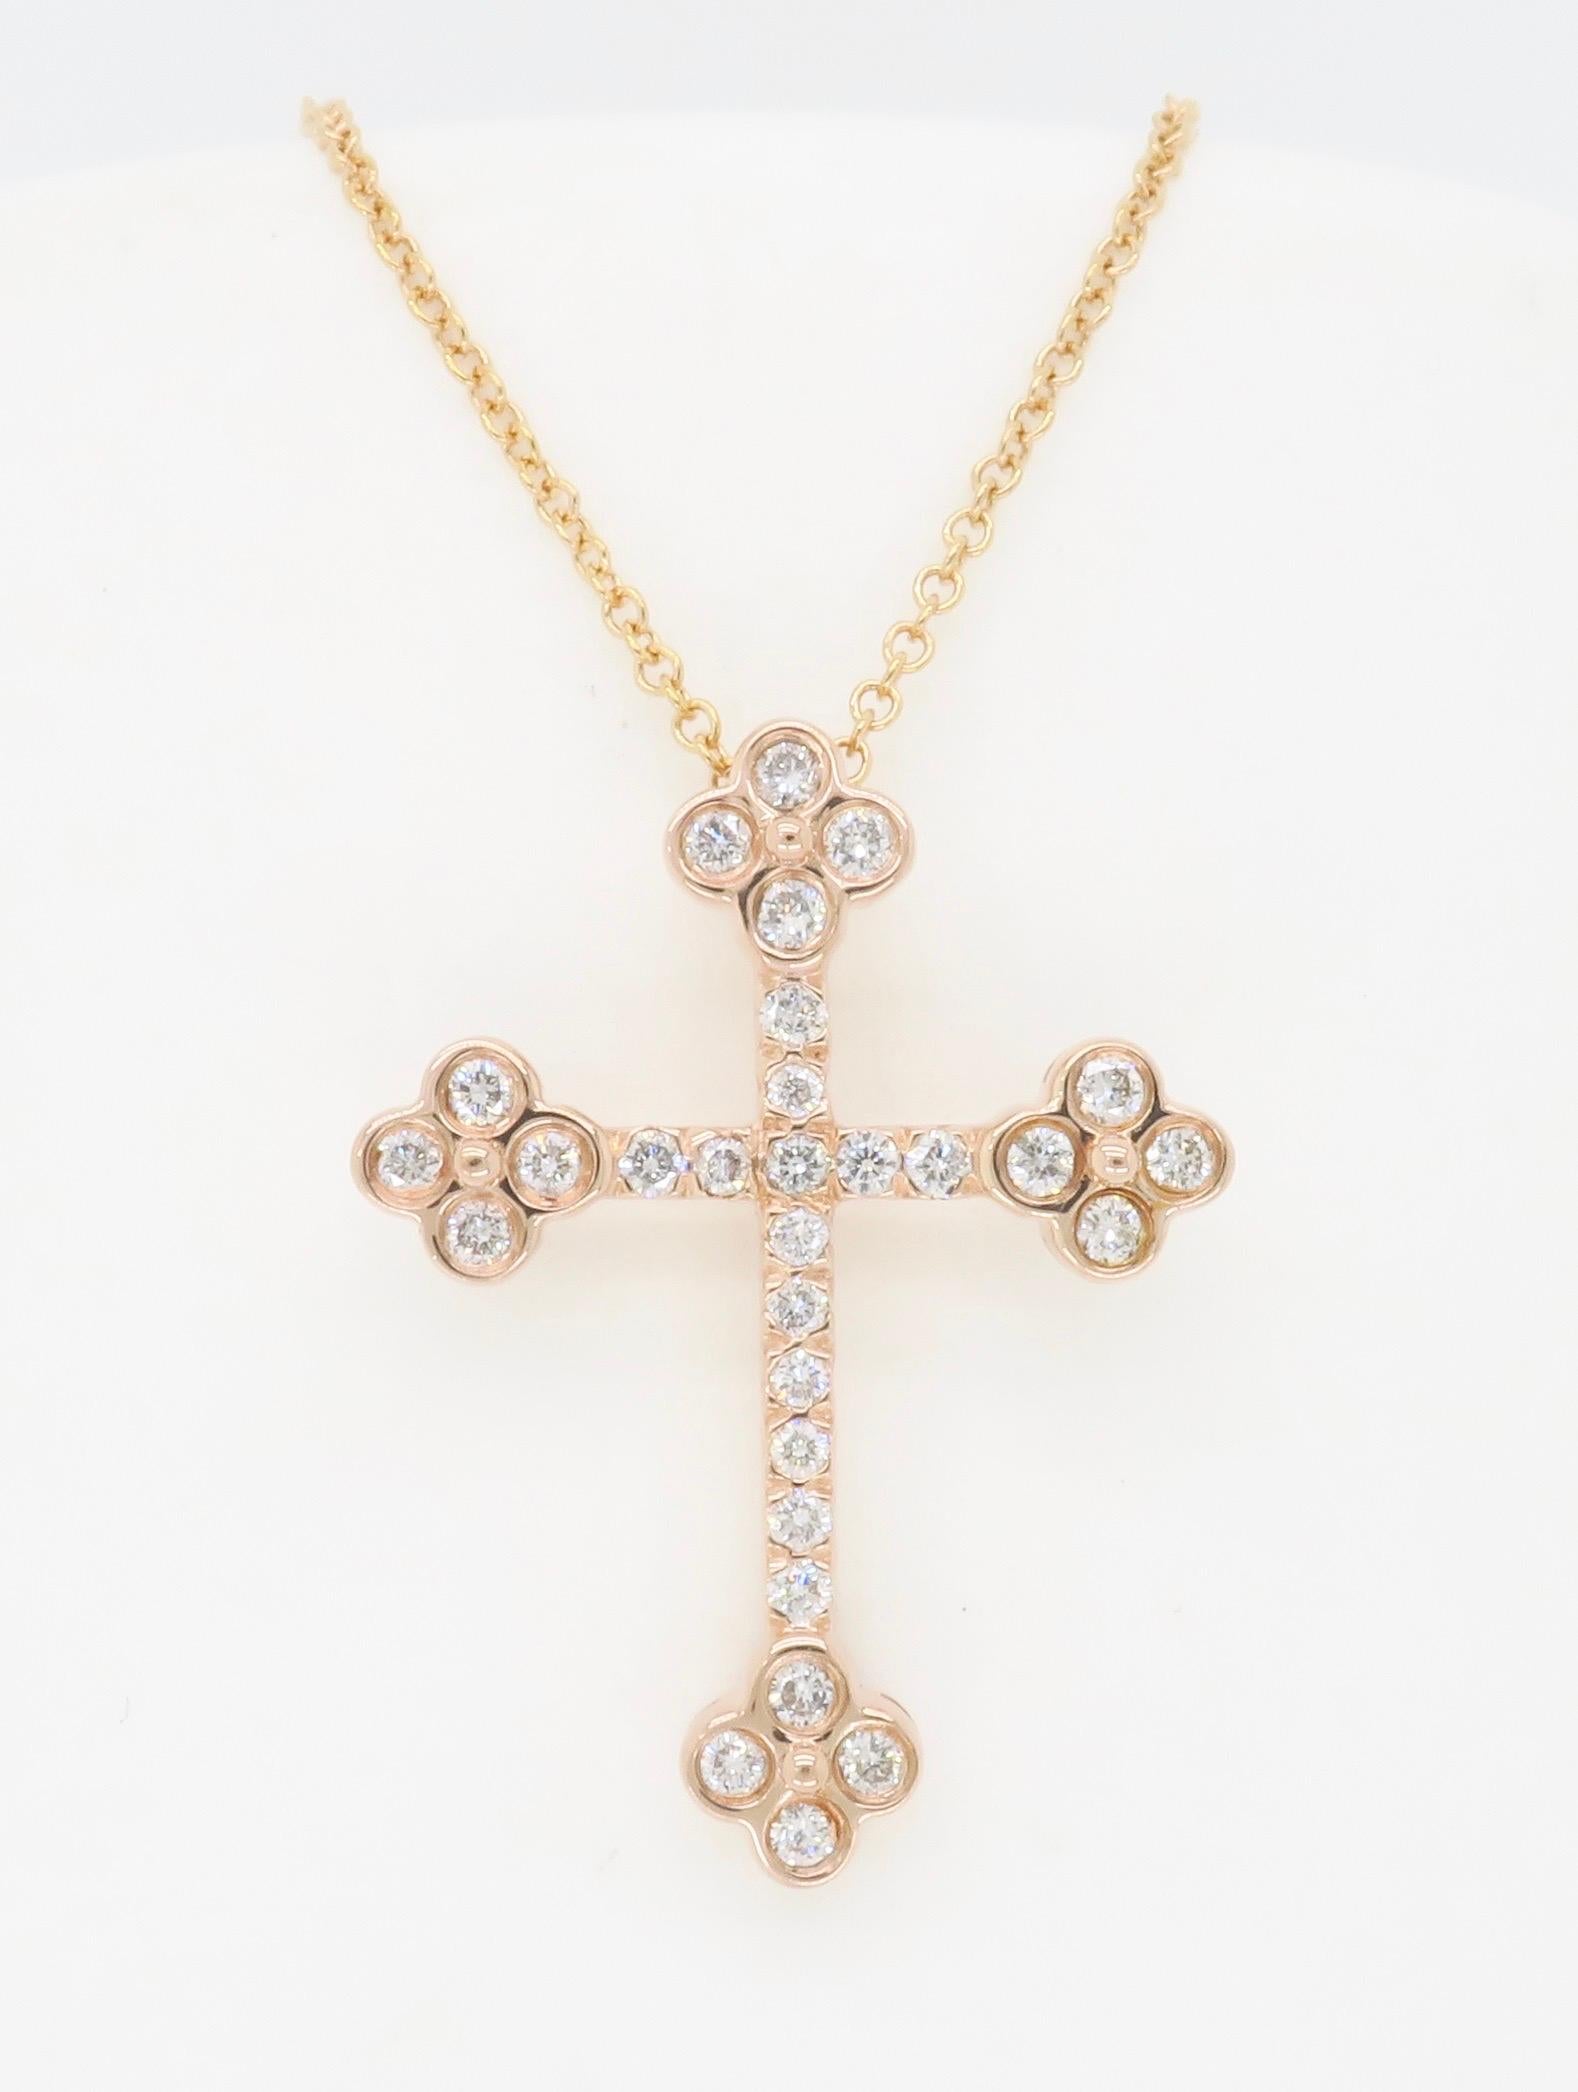 14k Rose Gold Diamond cross necklace made by EFFY.

Diamond Carat Weight: Approximately .50CTW
Diamond Cut: Round Brilliant
Color: Average F-H 
Clarity: Average SI
Metal: 14K Rose Gold
Pendant Length: 1